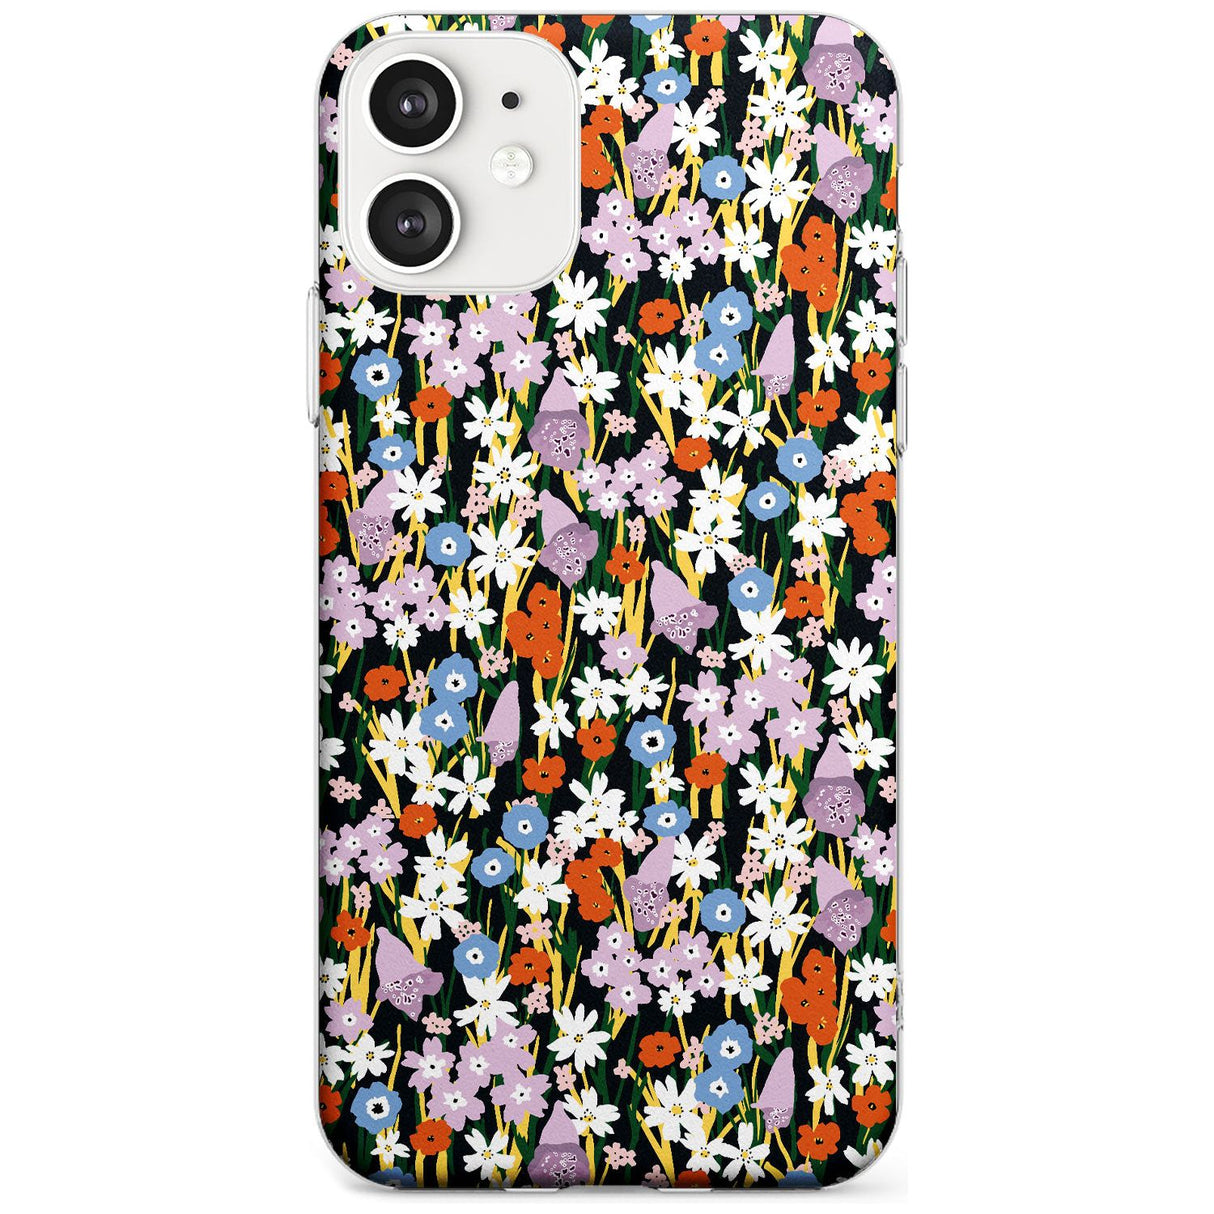 Energetic Floral Mix: Solid Black Impact Phone Case for iPhone 11